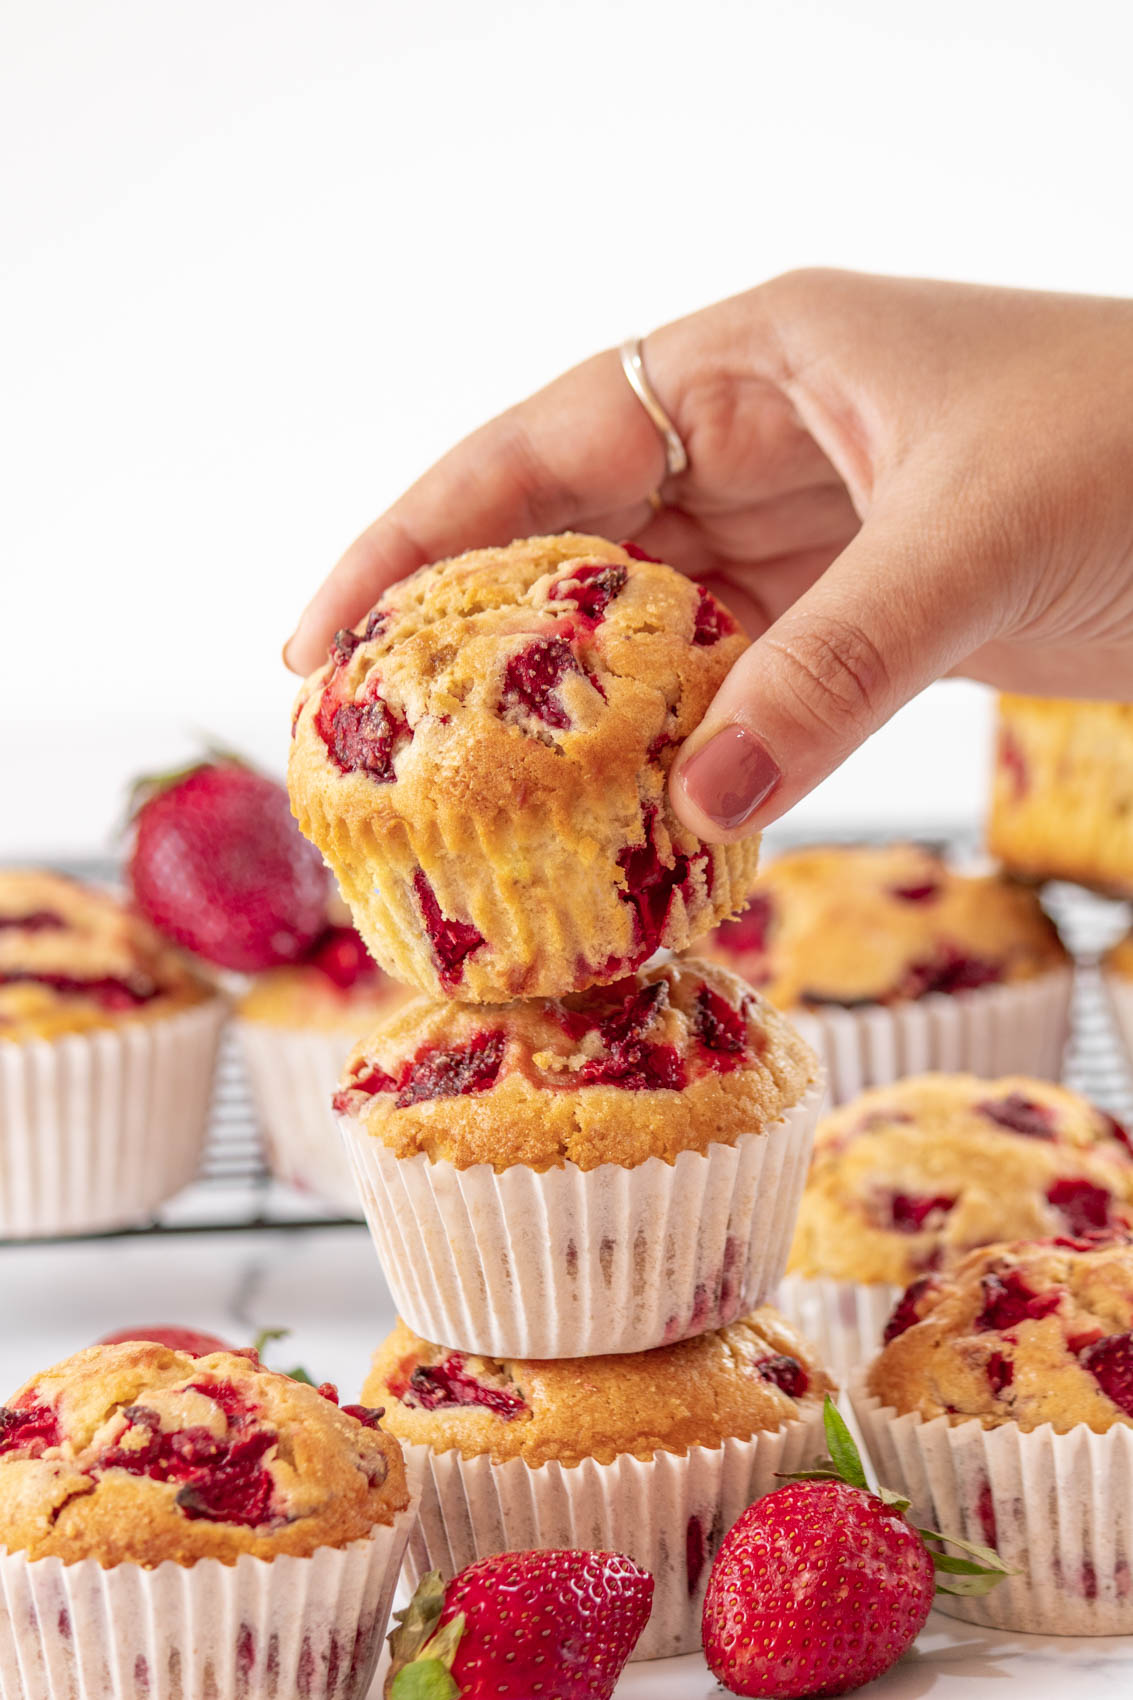 hand grabbing a strawberry muffin from a pile of fresh baked muffins